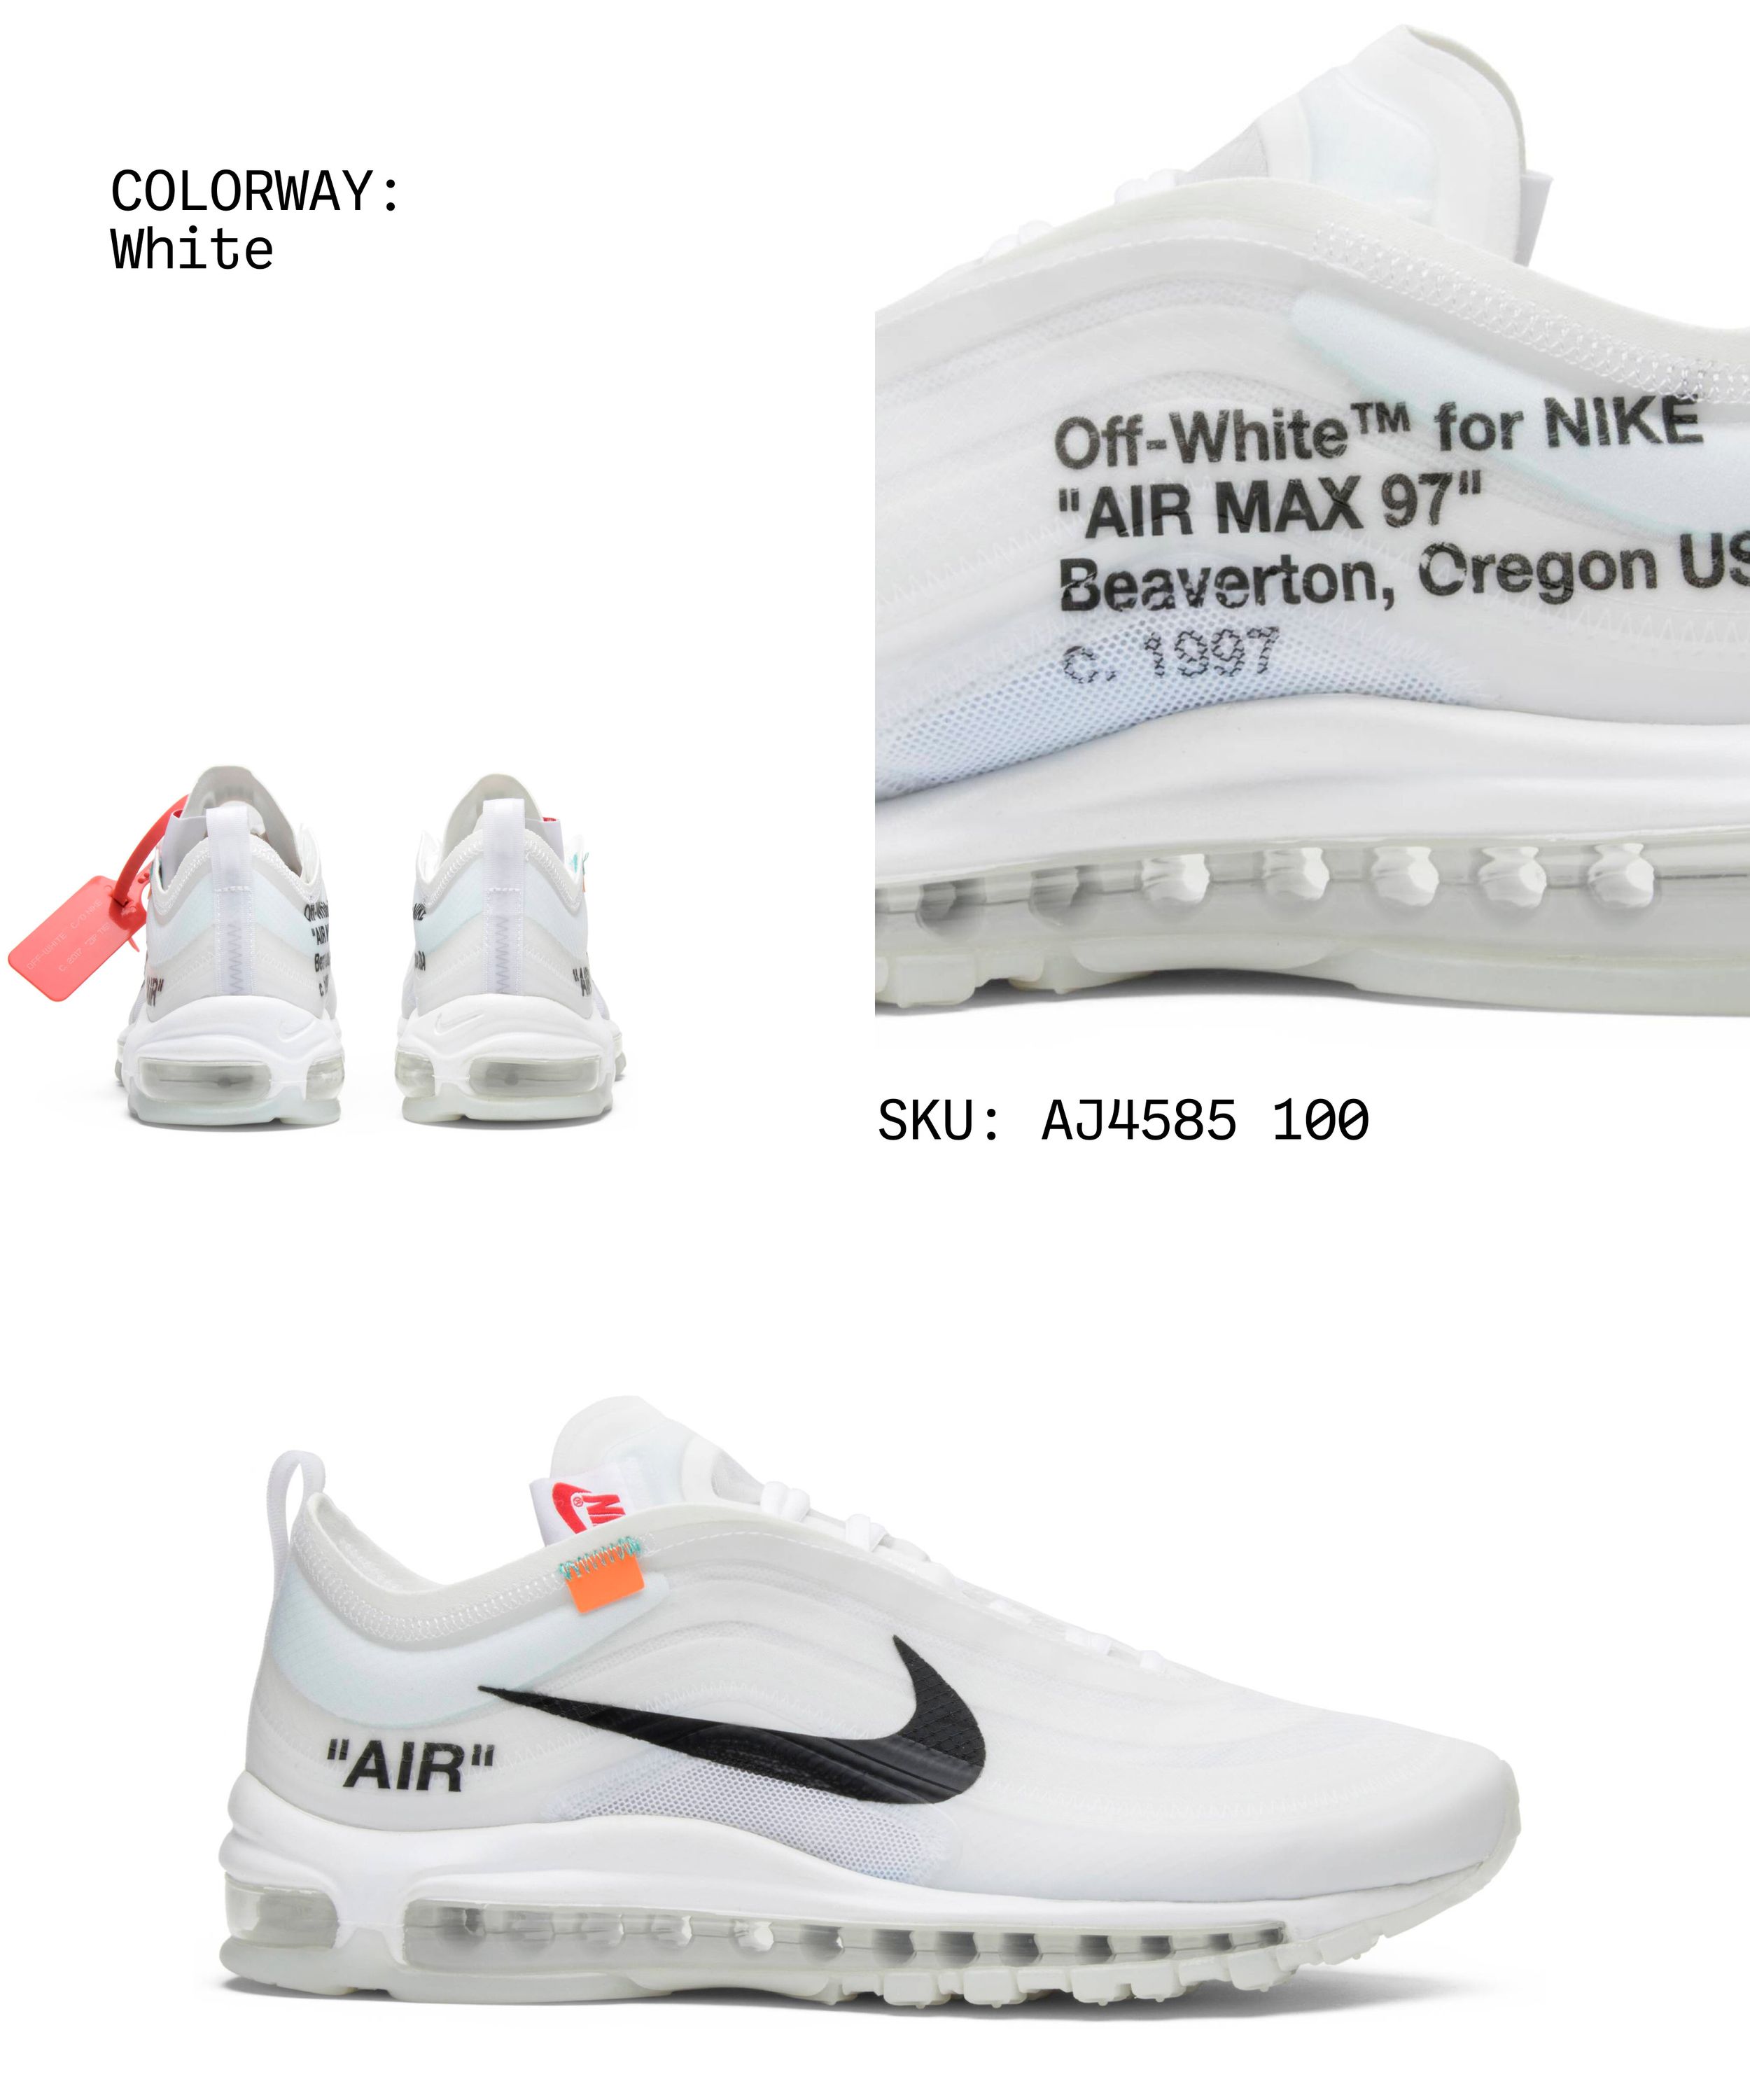 A COMPLETE COLLECTION OF VIRGIL ABLOH OFF-WHITE X NIKE SNEAKERS, NIKE X  OFF-WHITE, 2017-2020